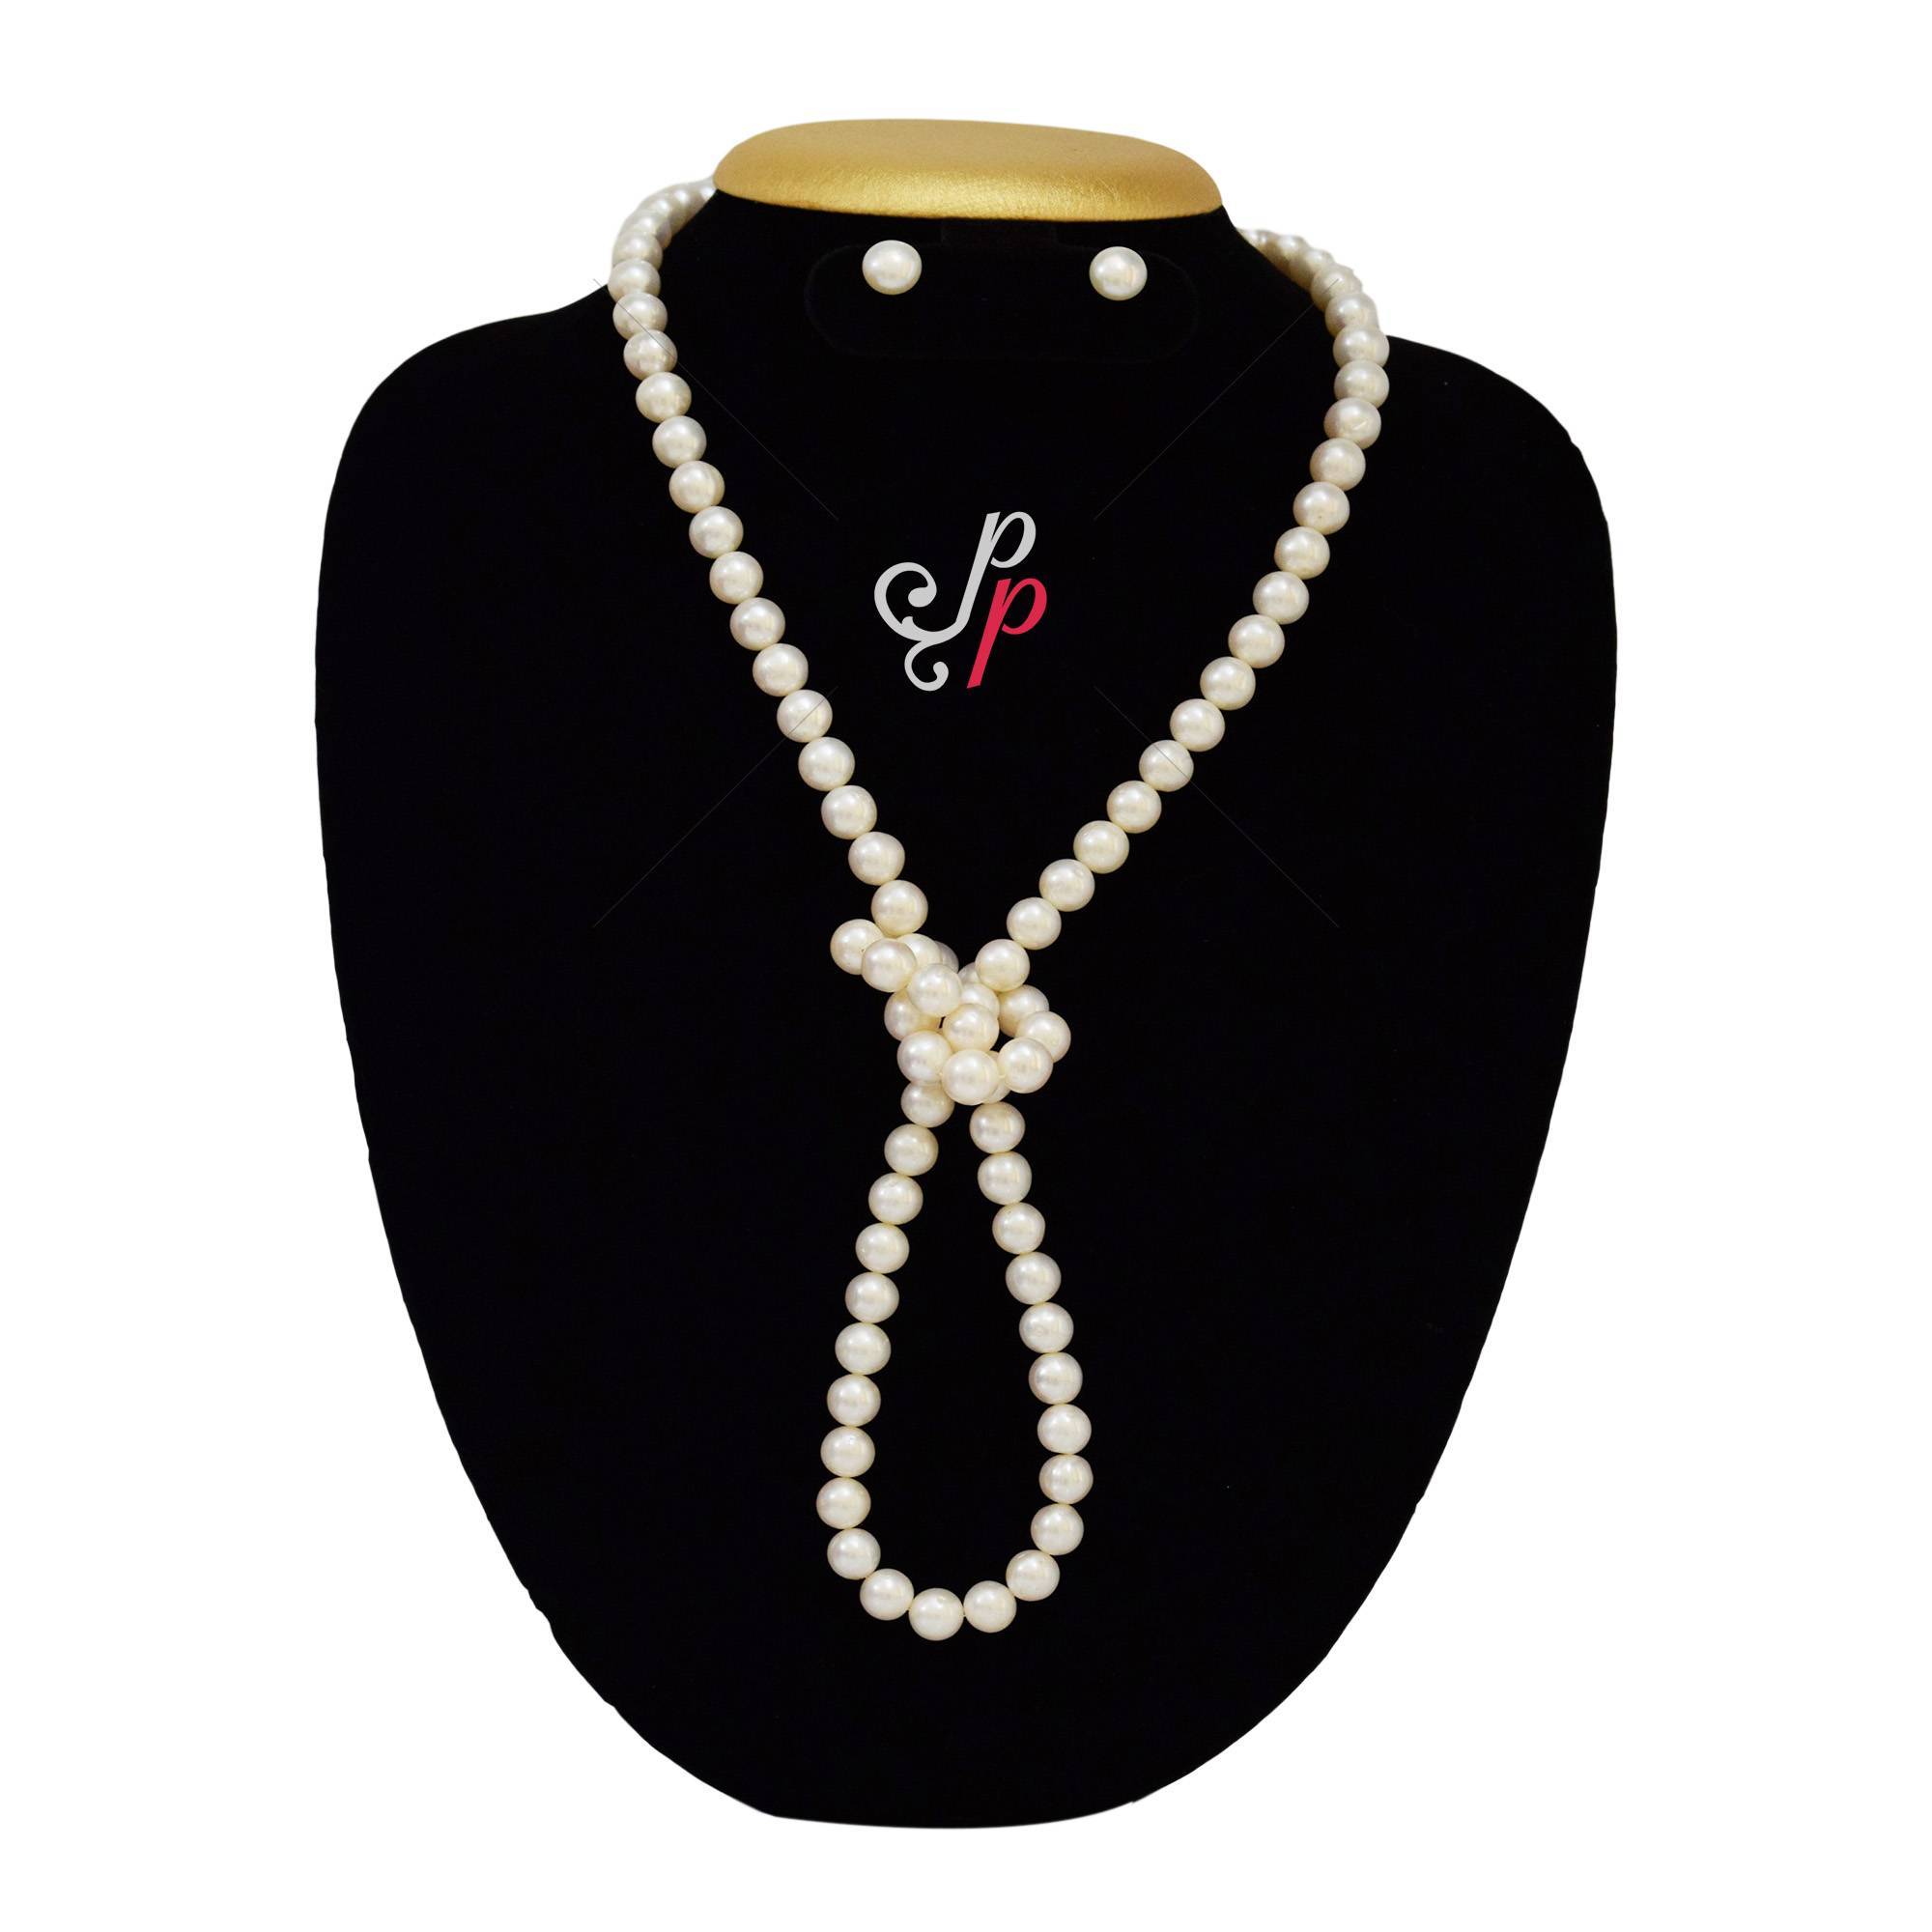 Buy Latest Pearl Necklace Designs For Women And Men – Gehna Shop